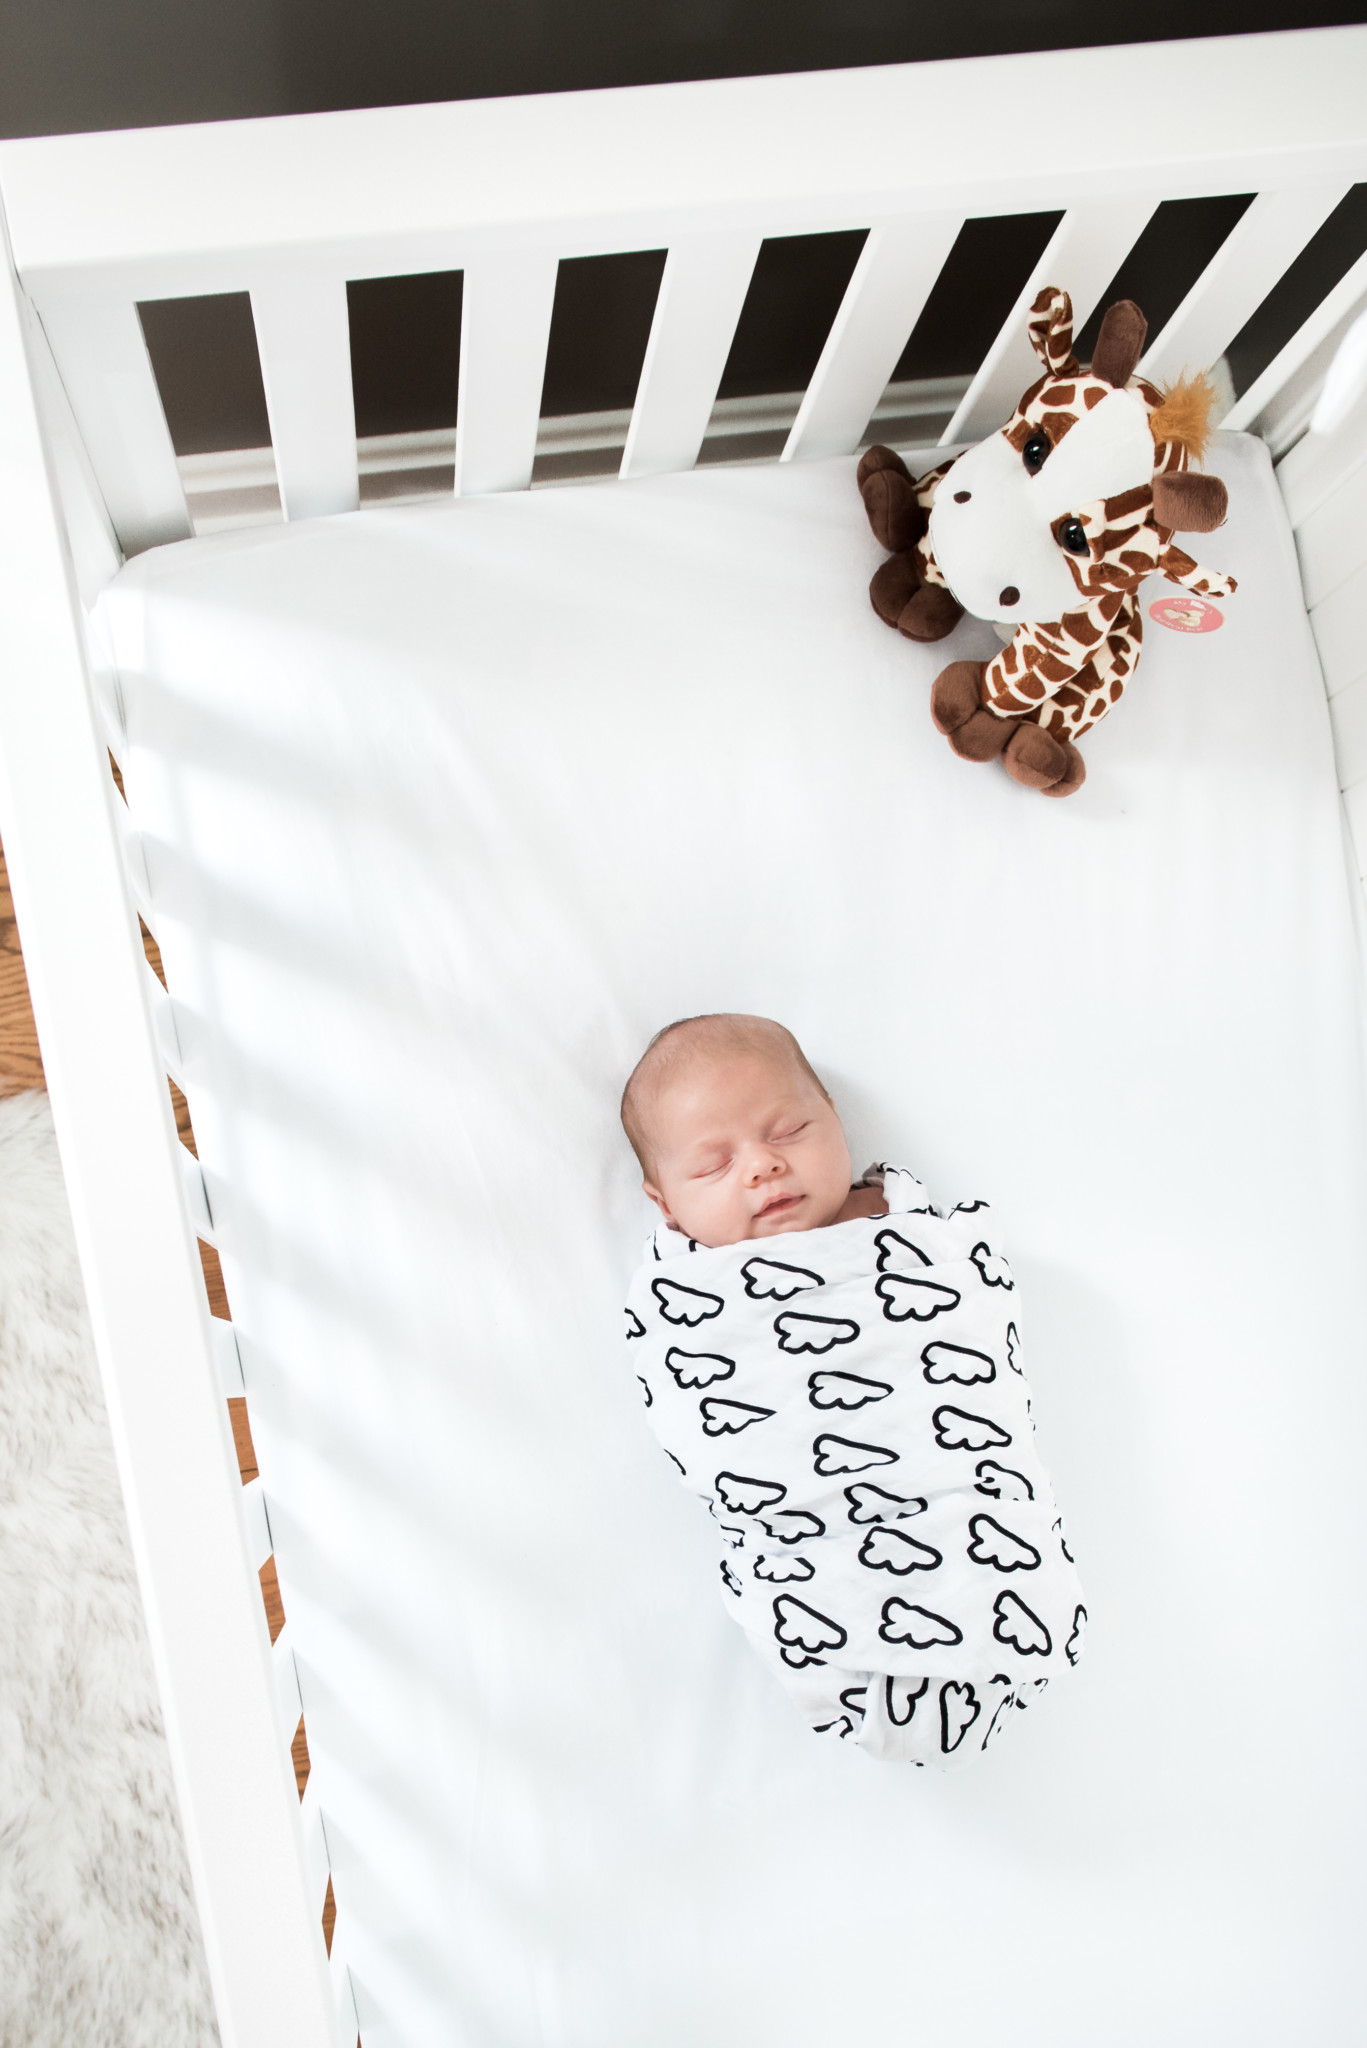 newborn boy room in grey and white with arrows and stripes in a in home lifestyle newborn photography session in Pittsburgh and Cranberry Twp PA 16066